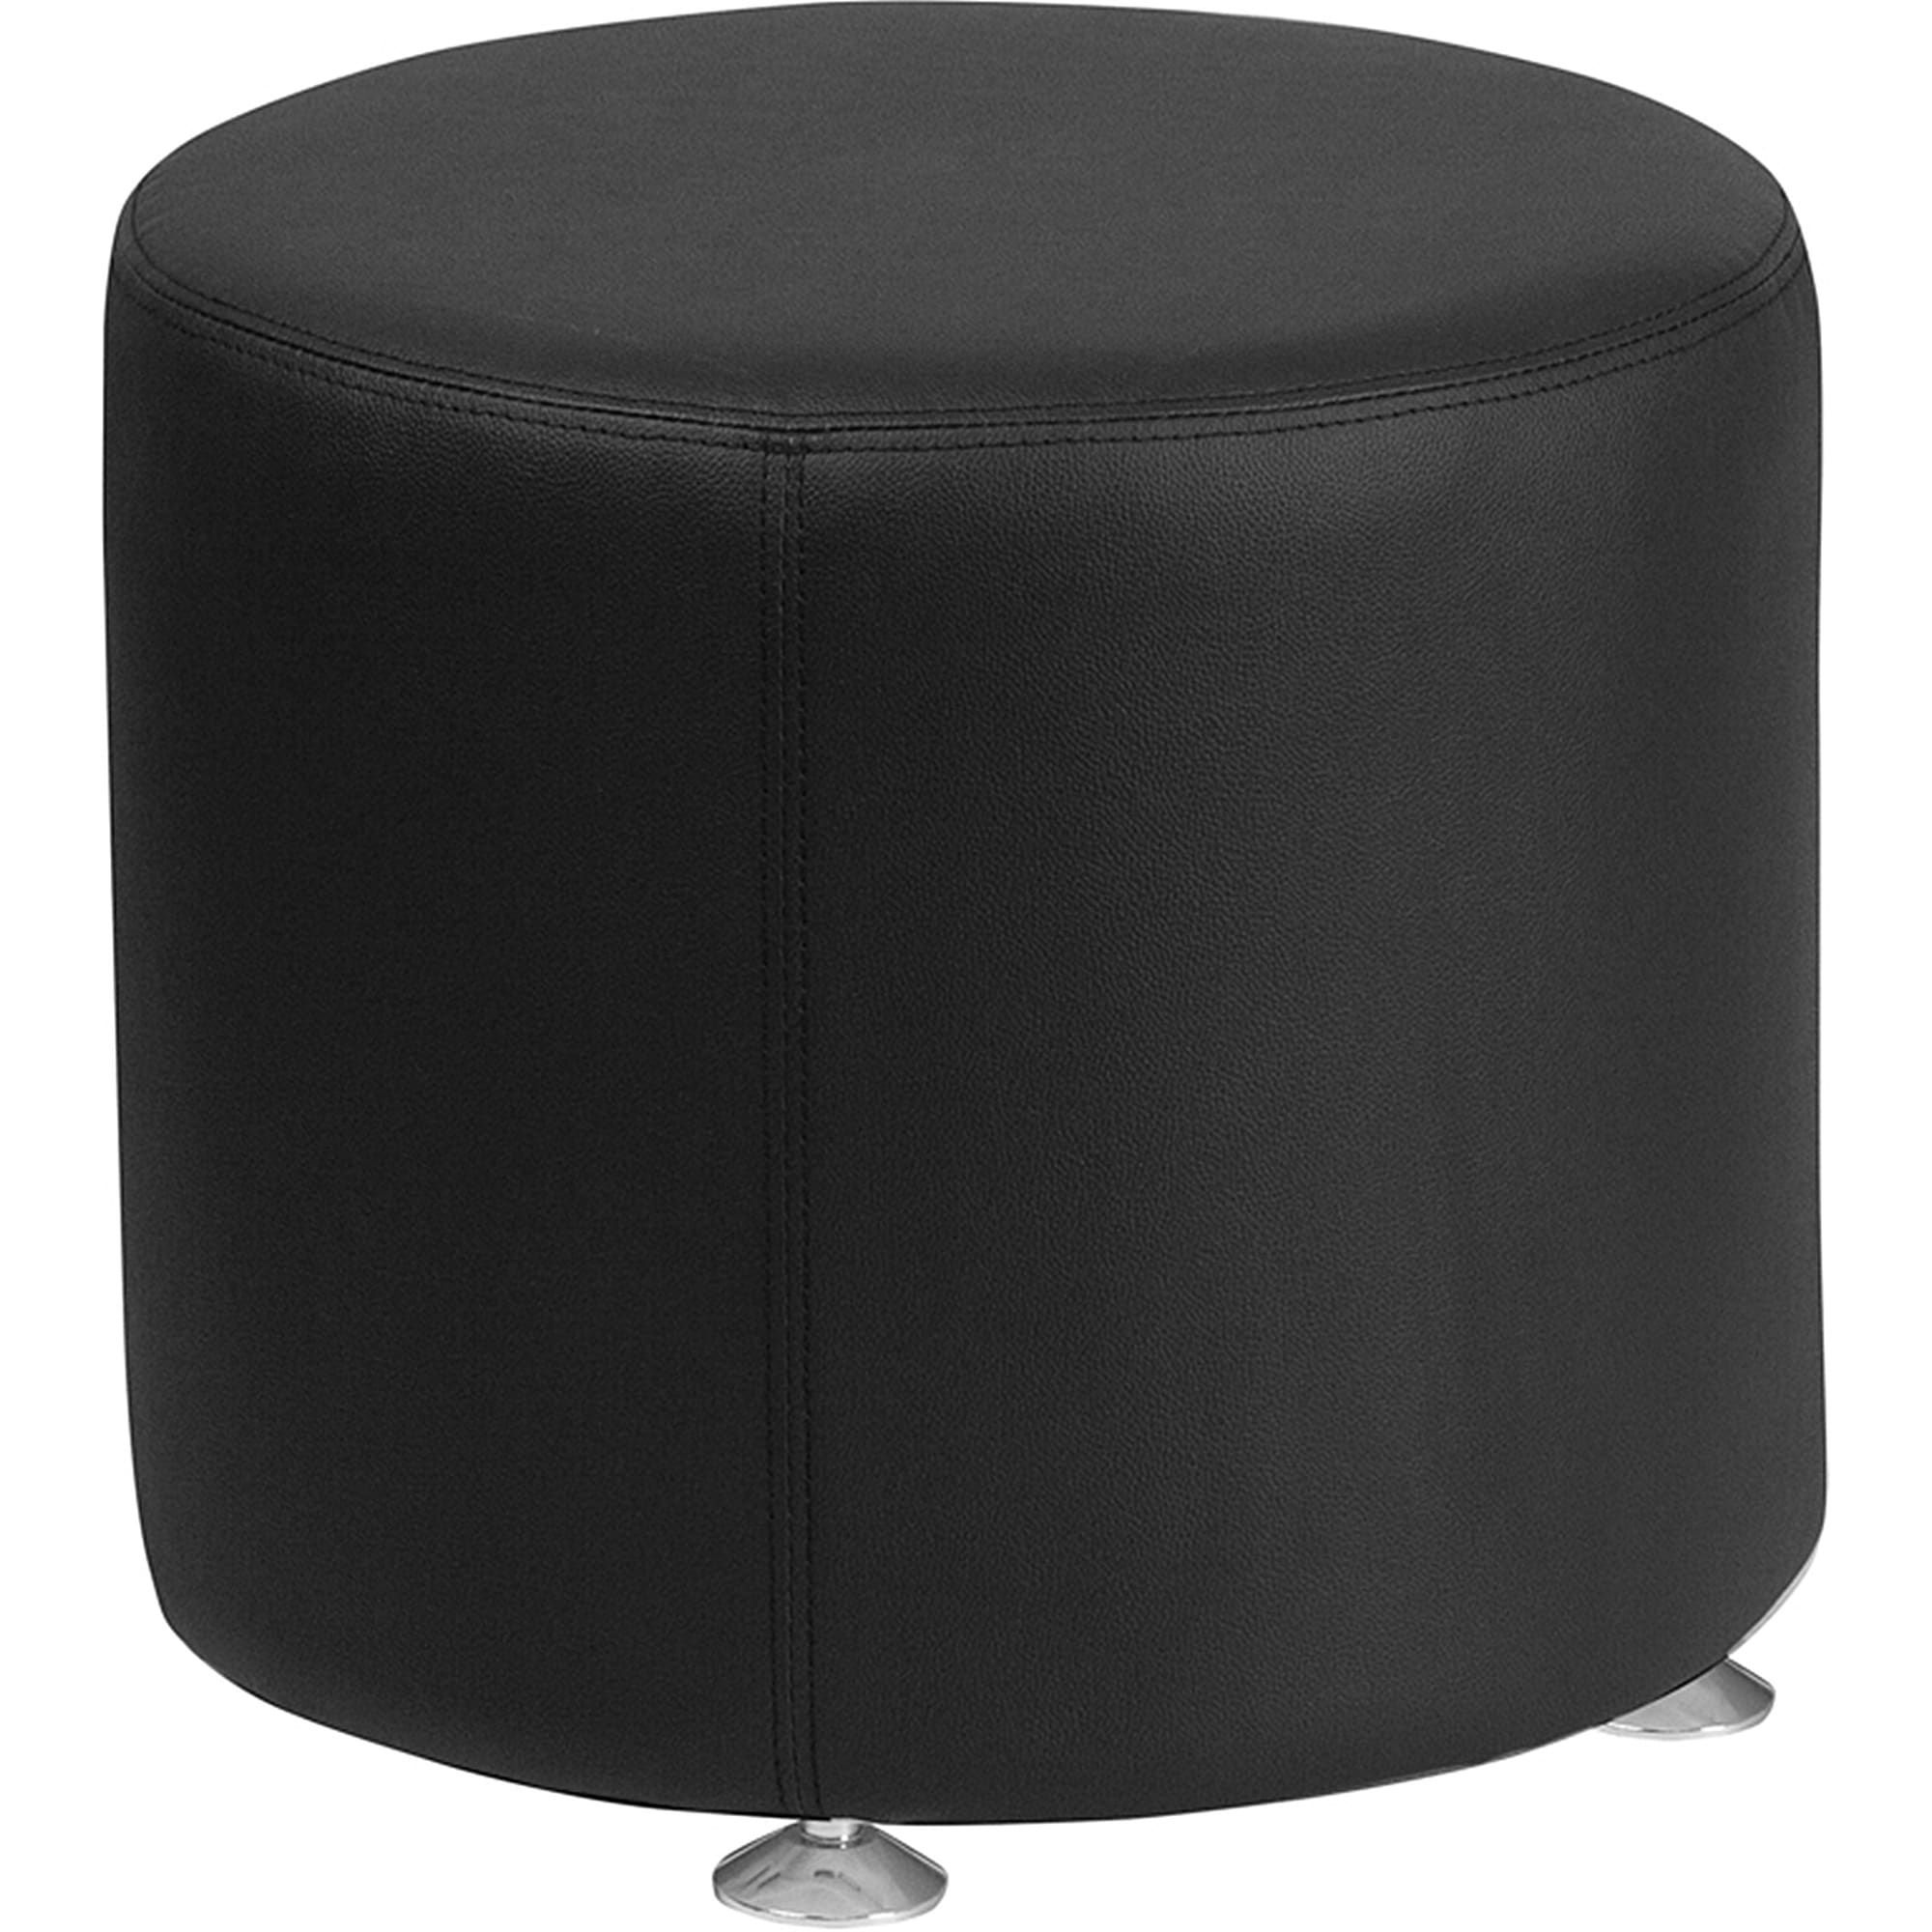 Antrim Black Leather Upholstered Round Ottoman Black Medium | Ebay Intended For Brown Leather Round Pouf Ottomans (View 15 of 20)